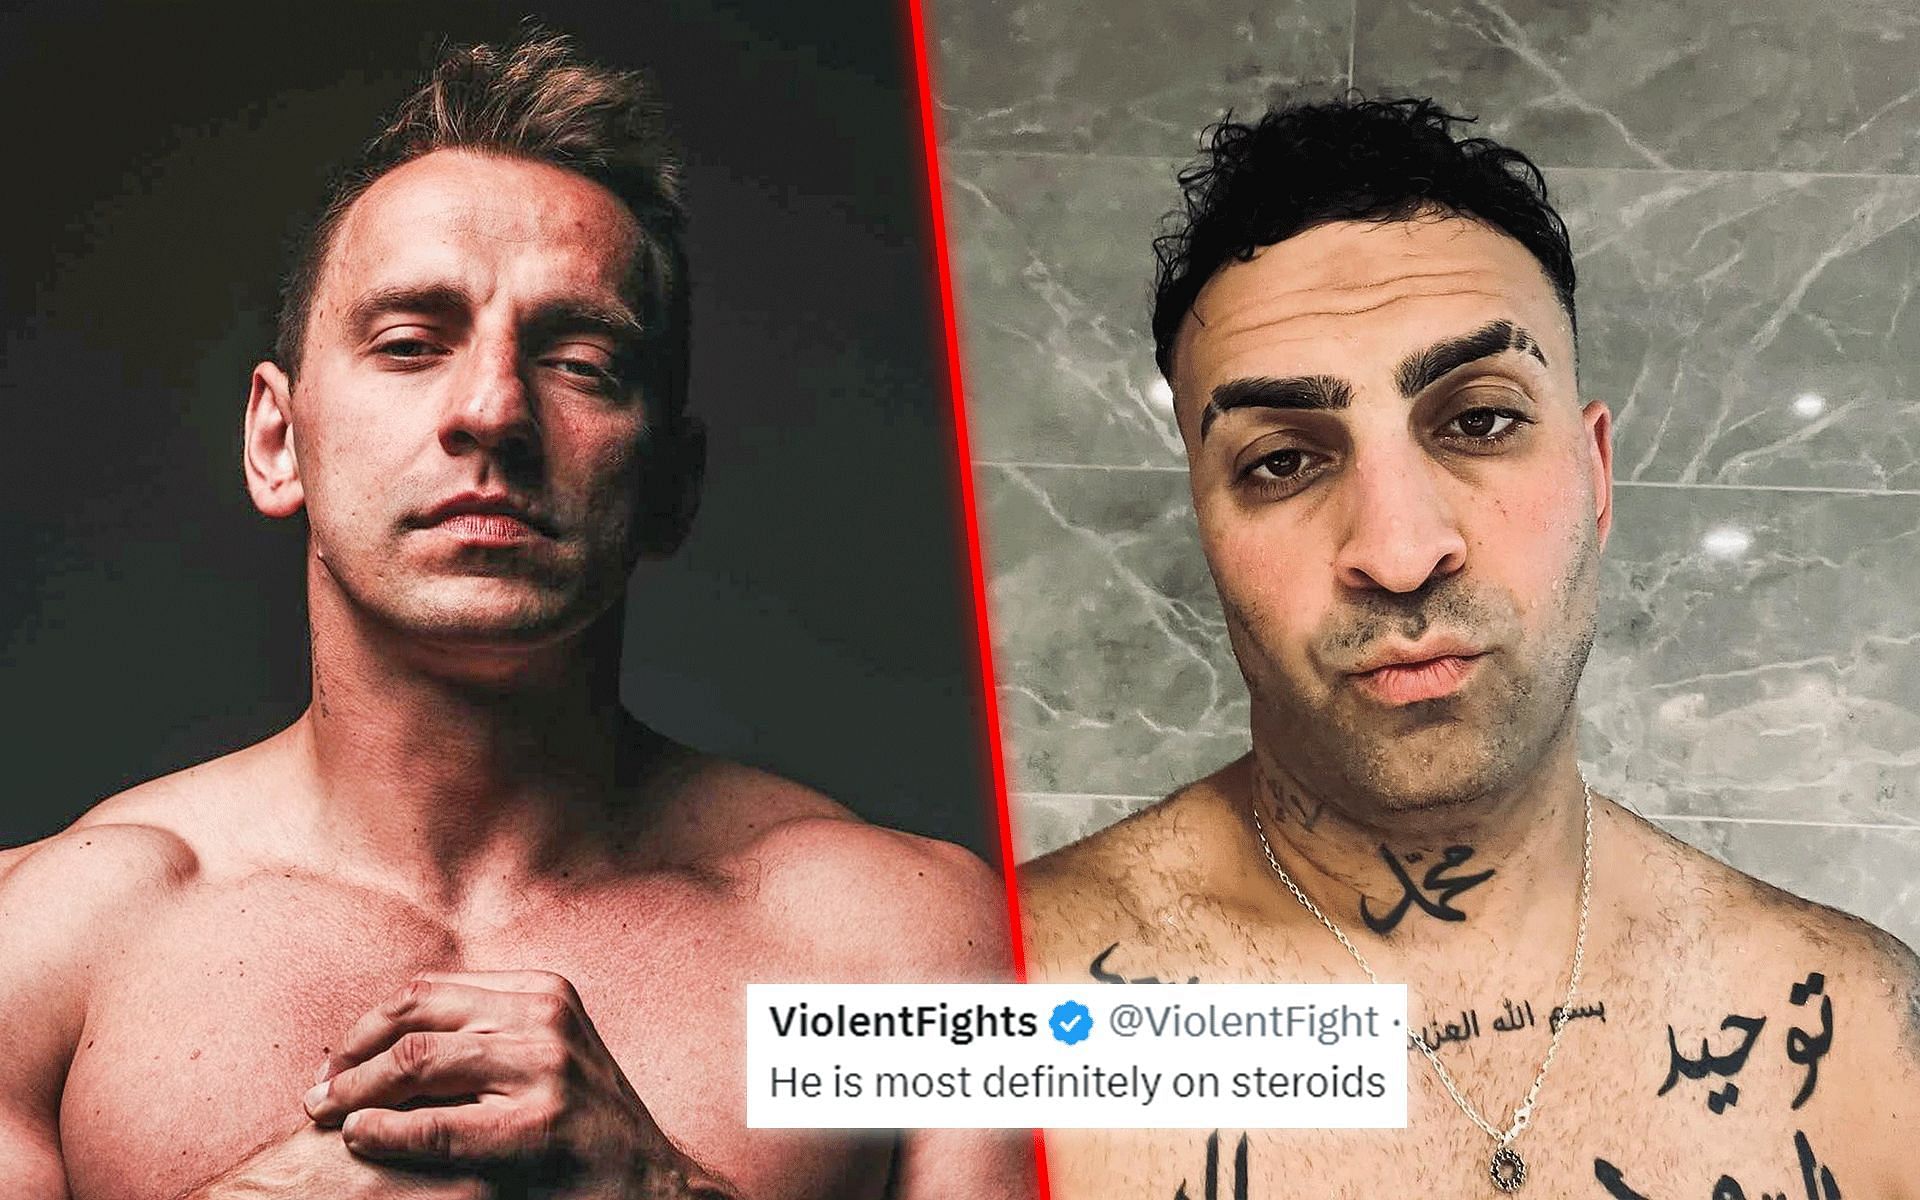 Vitaly (left) draws fan criticism for refusing post-fight drug test after beating MoDeen (right) [Image Courtesy: @vitalythegoat via Instagram and @mo.deen_ via Instagram]